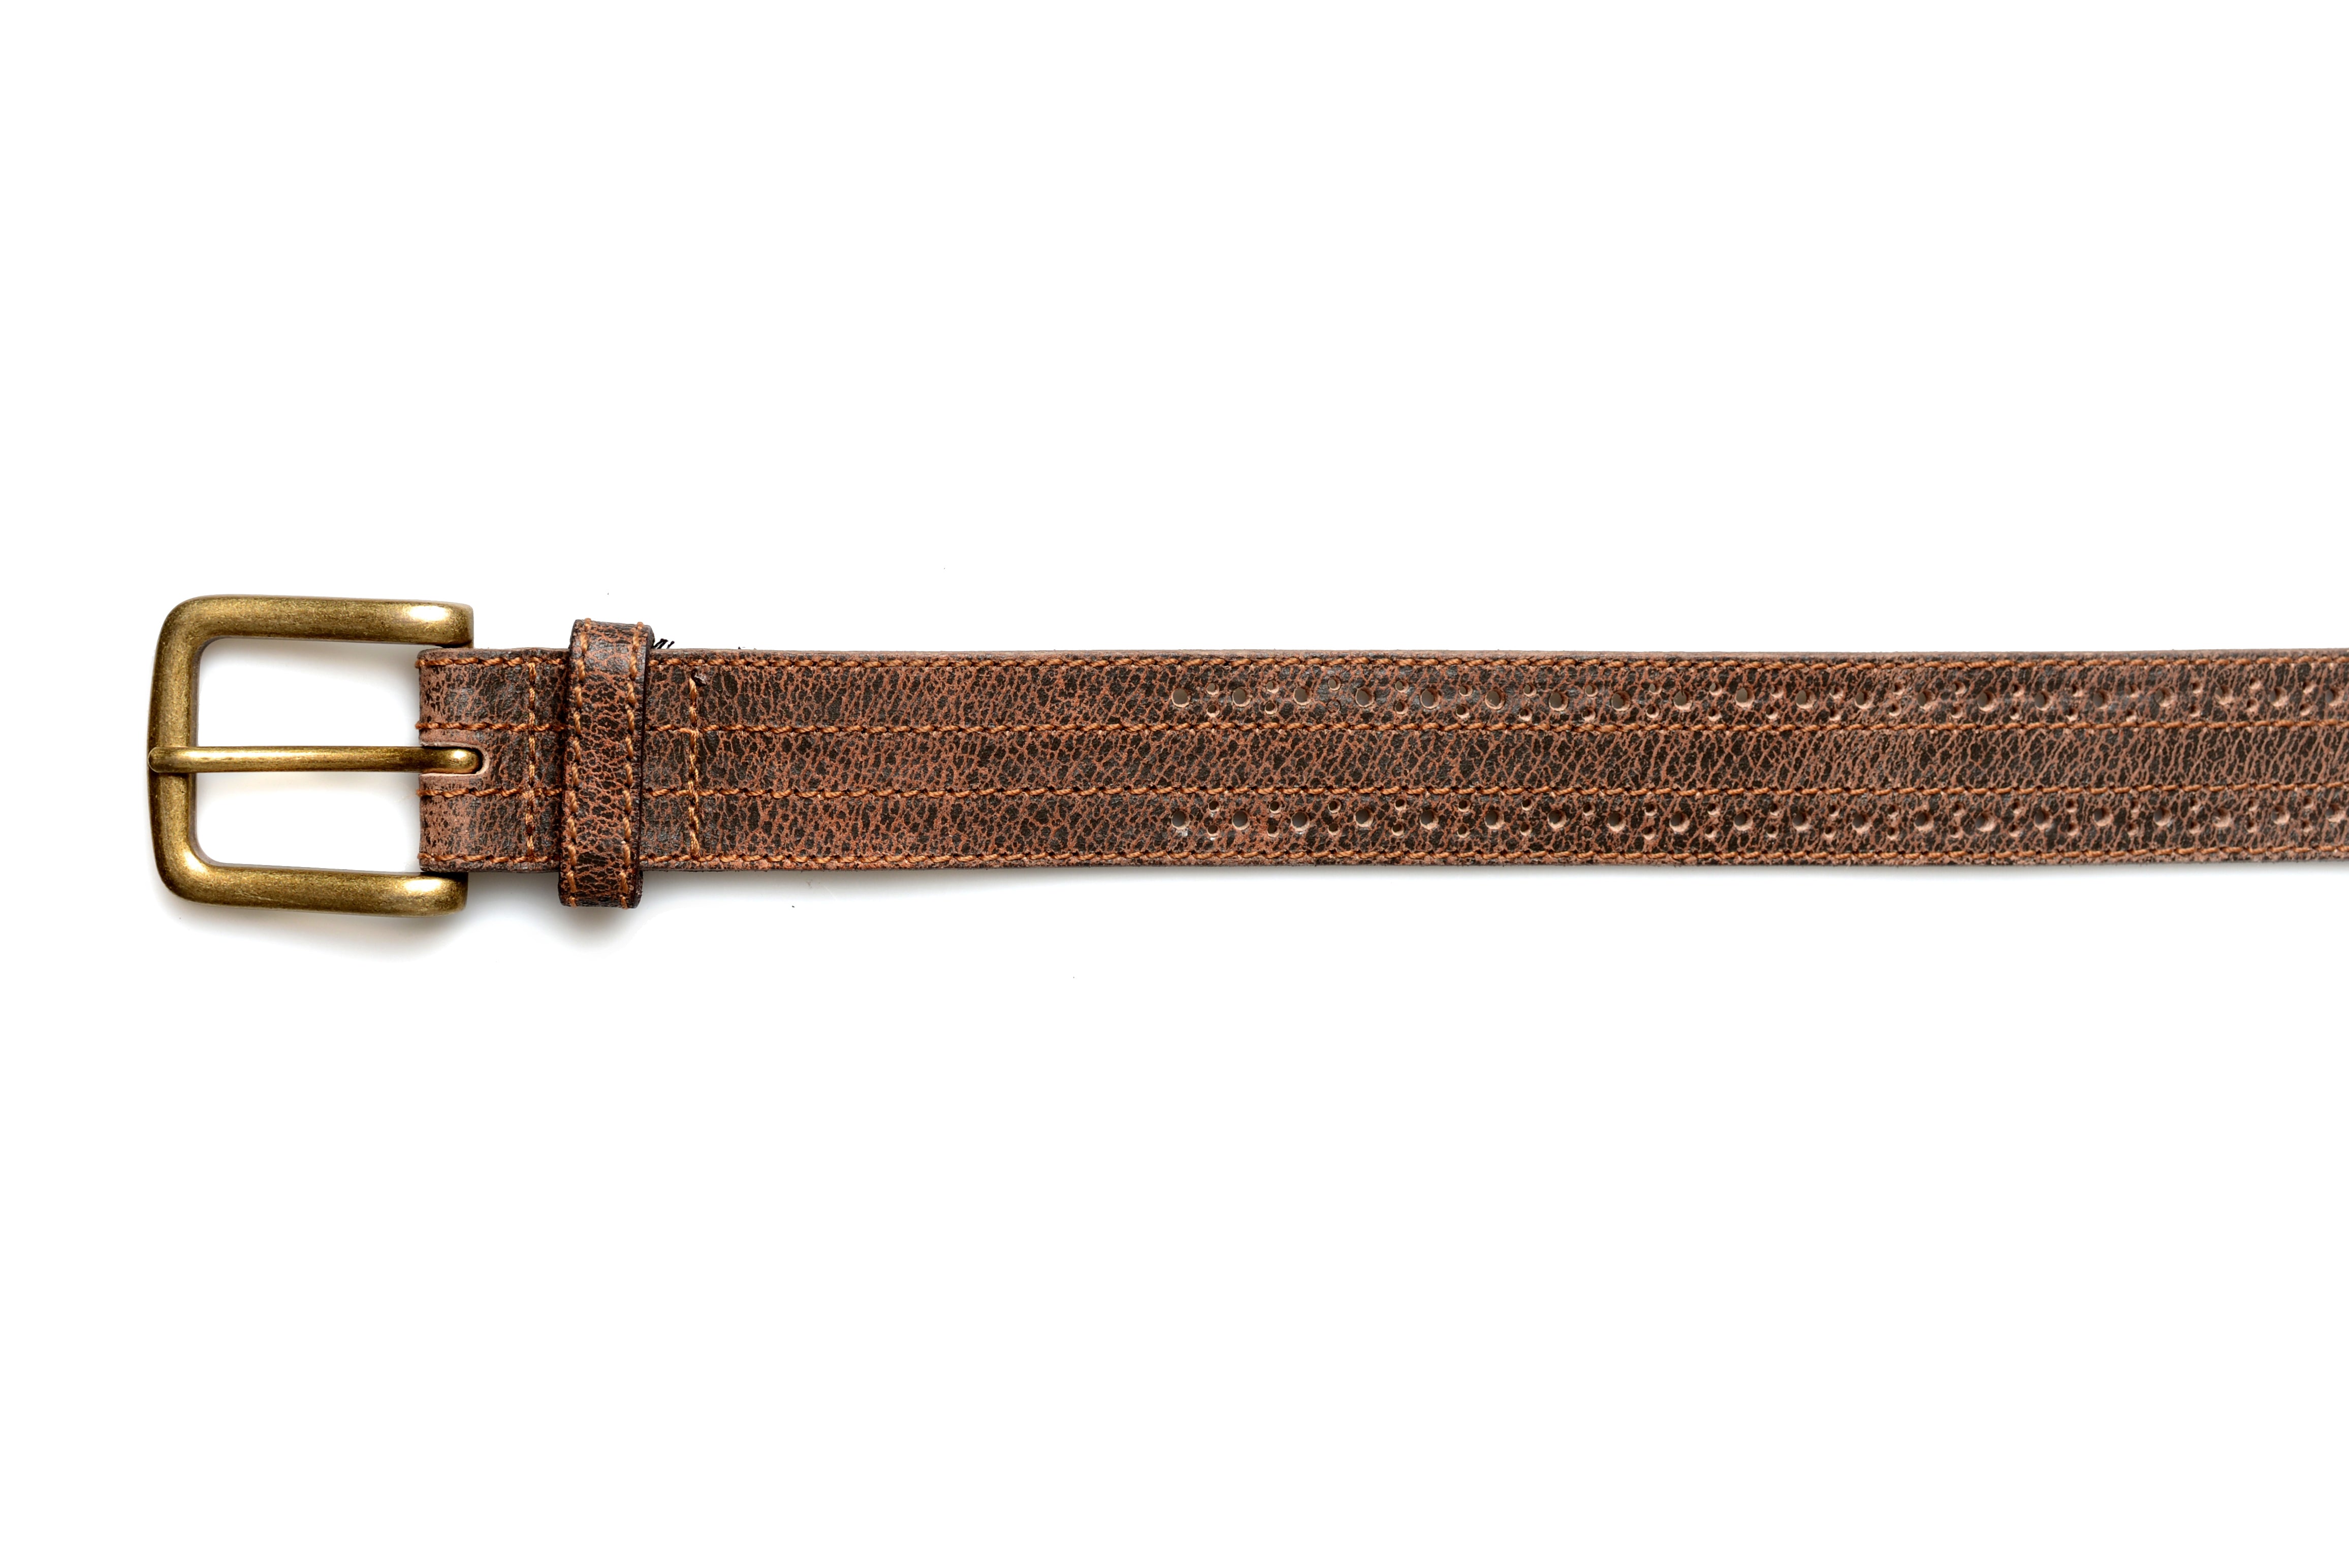 A Addison brown leather belt with silver grommets on a white background by Bed Stu.